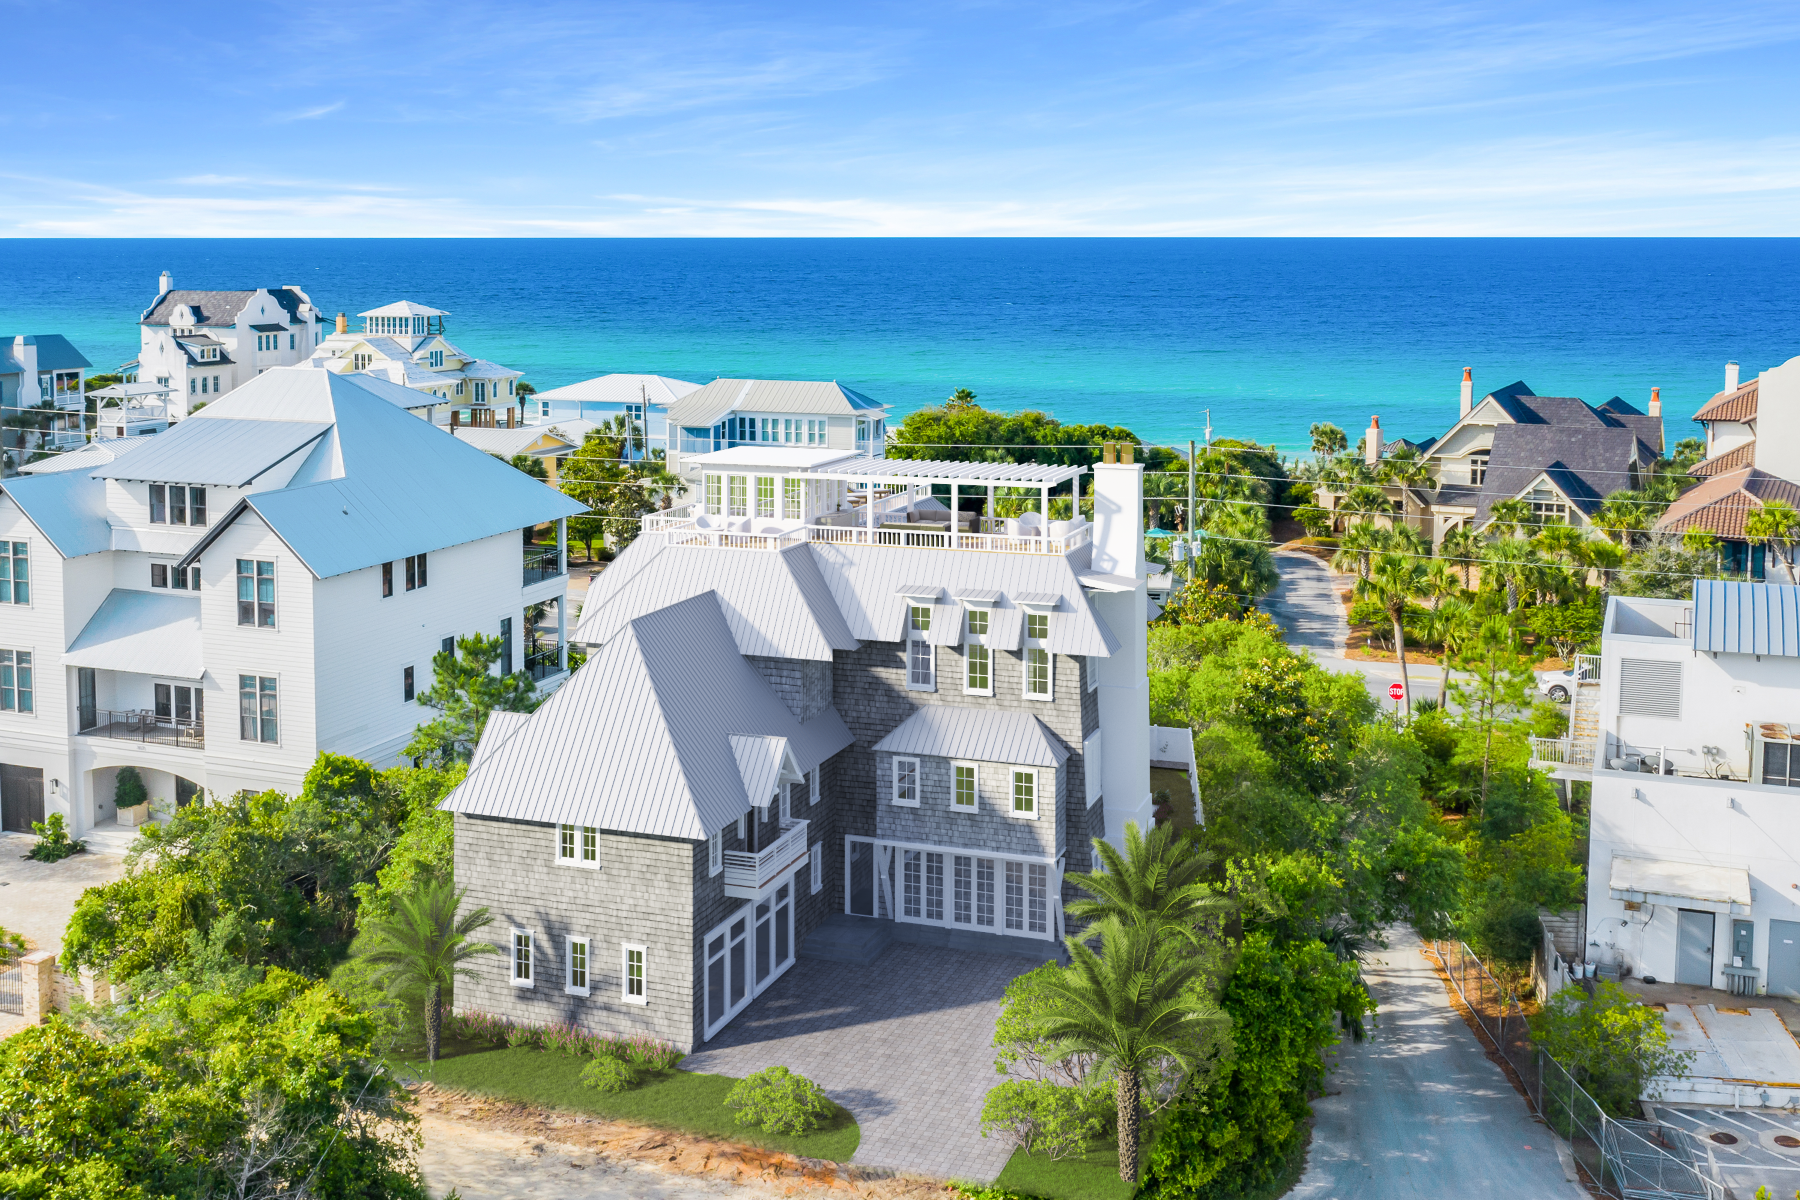 Single Family Homes for Sale at Architecturally Significant New Construction on 30A 44 Headland Avenue Santa Rosa Beach, Florida 32459 United States